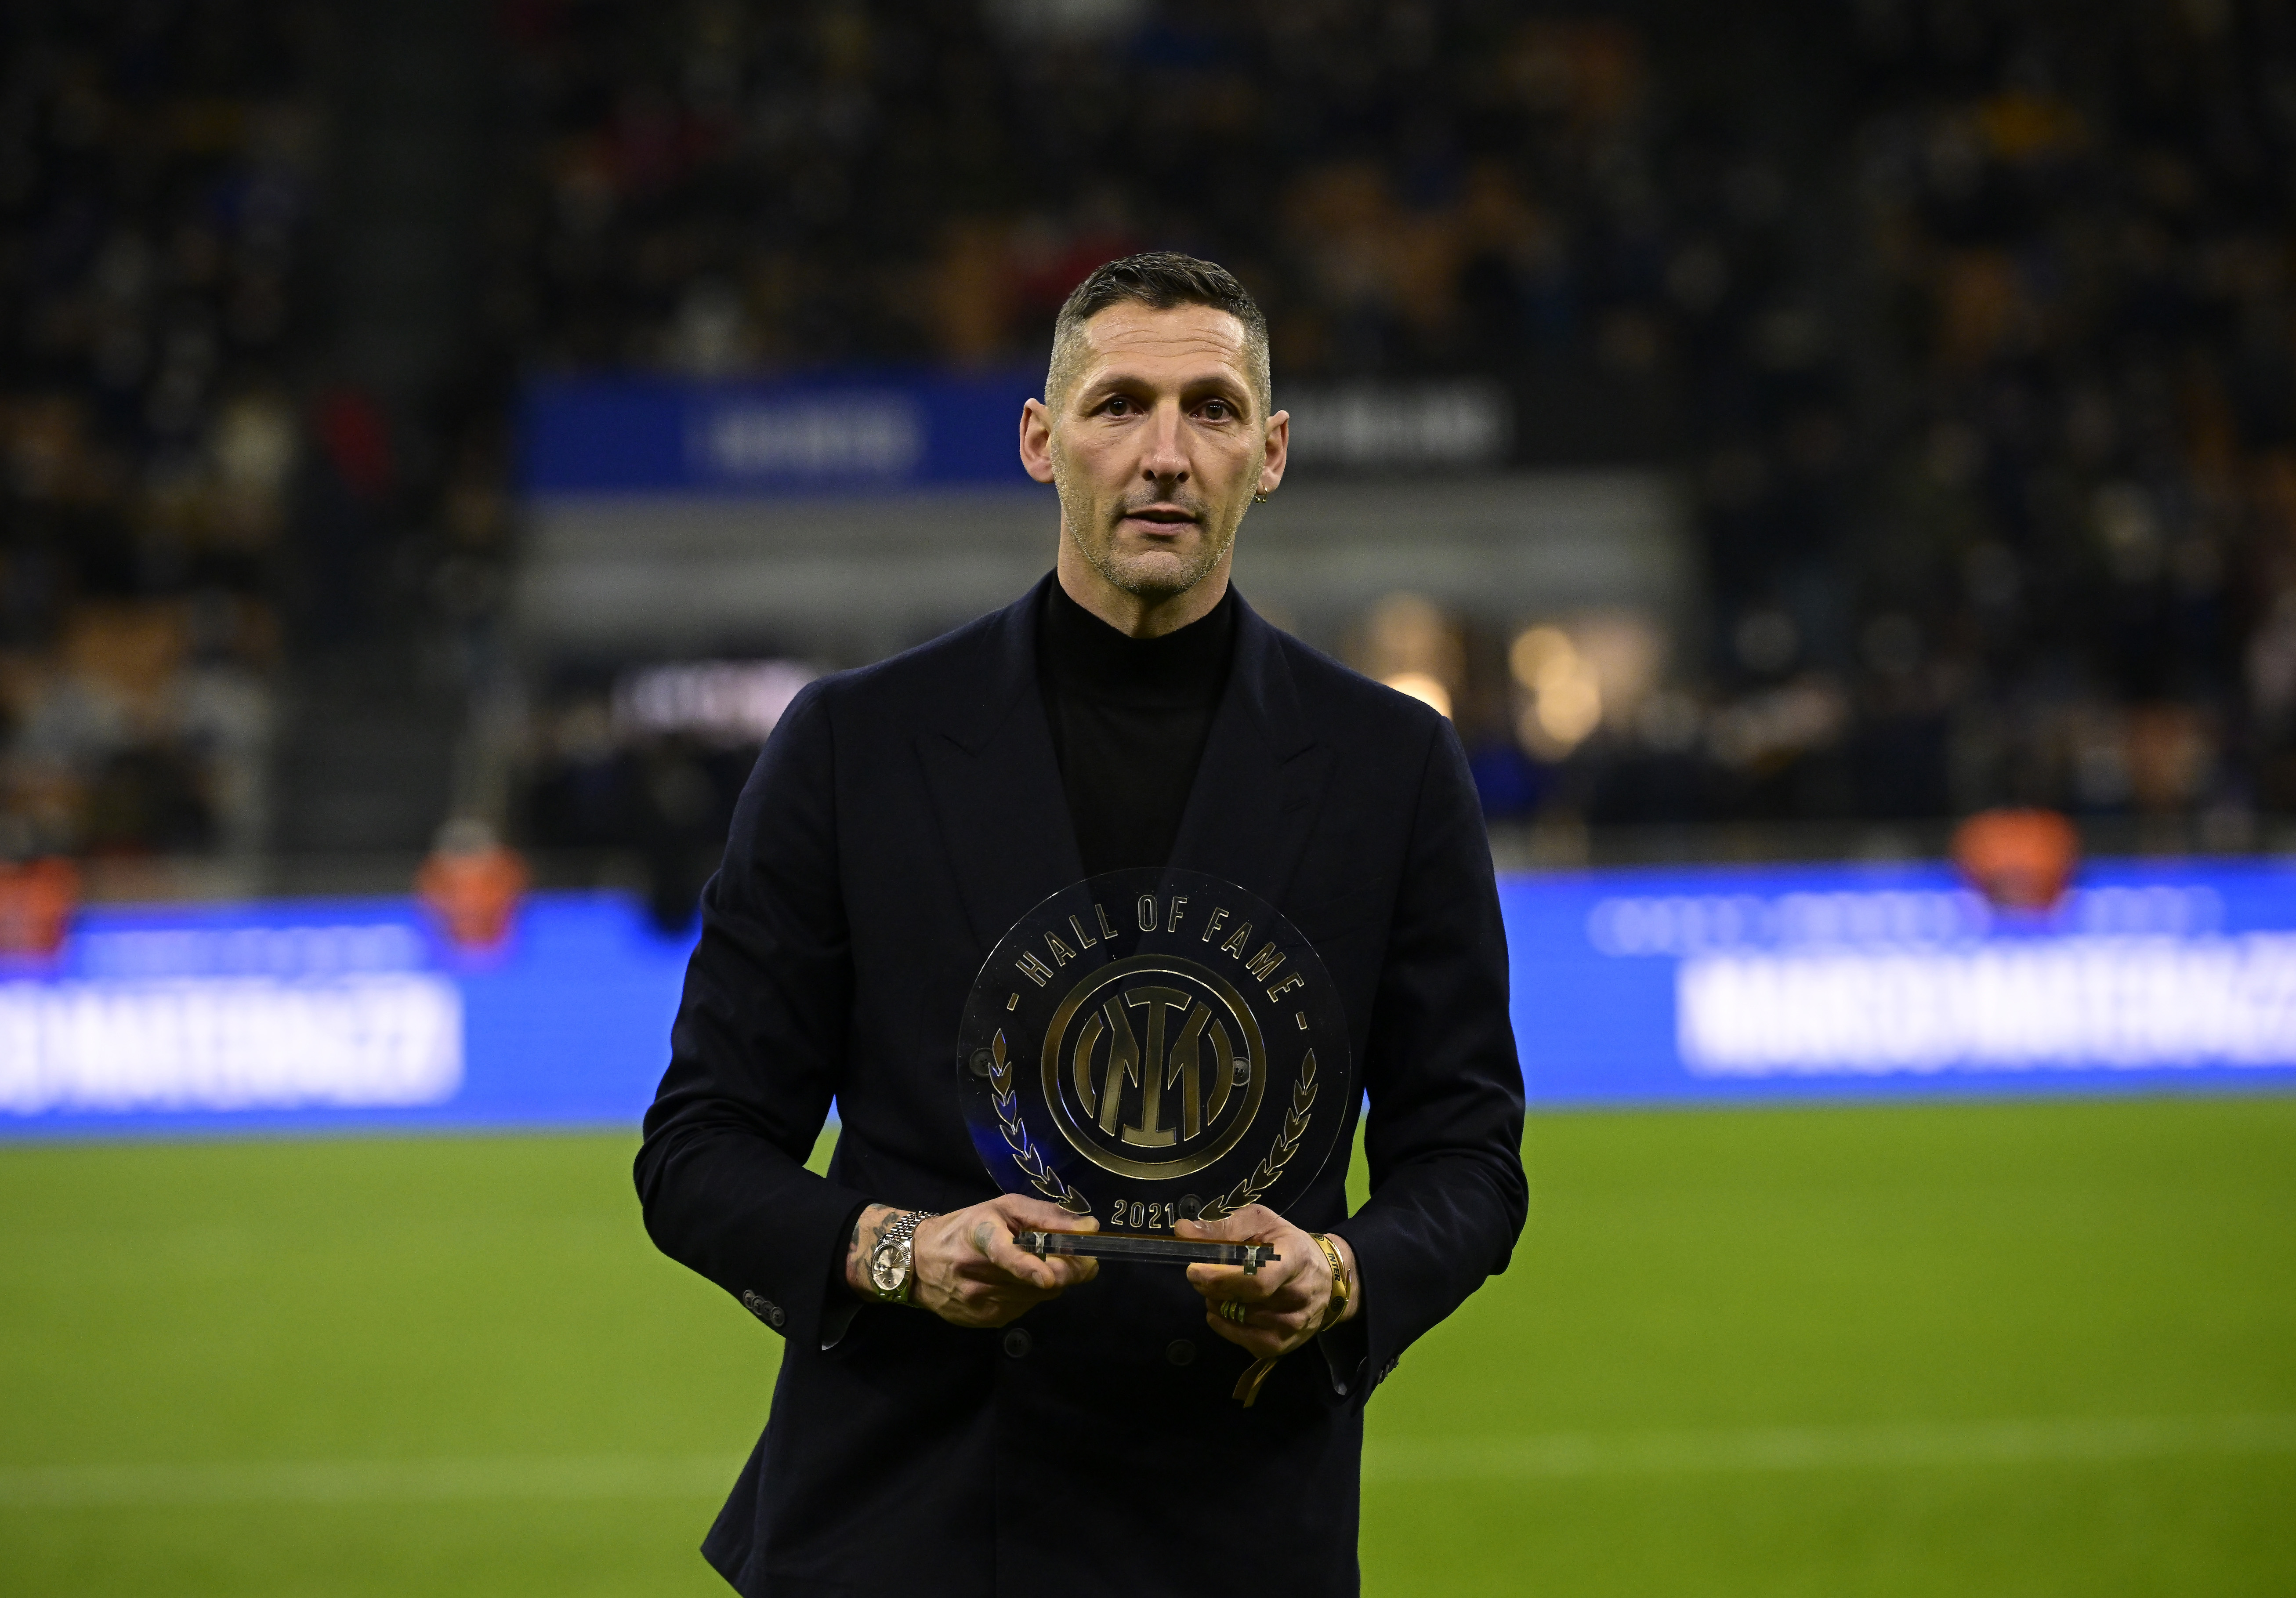 Marco Materazzi Inter hall of fame